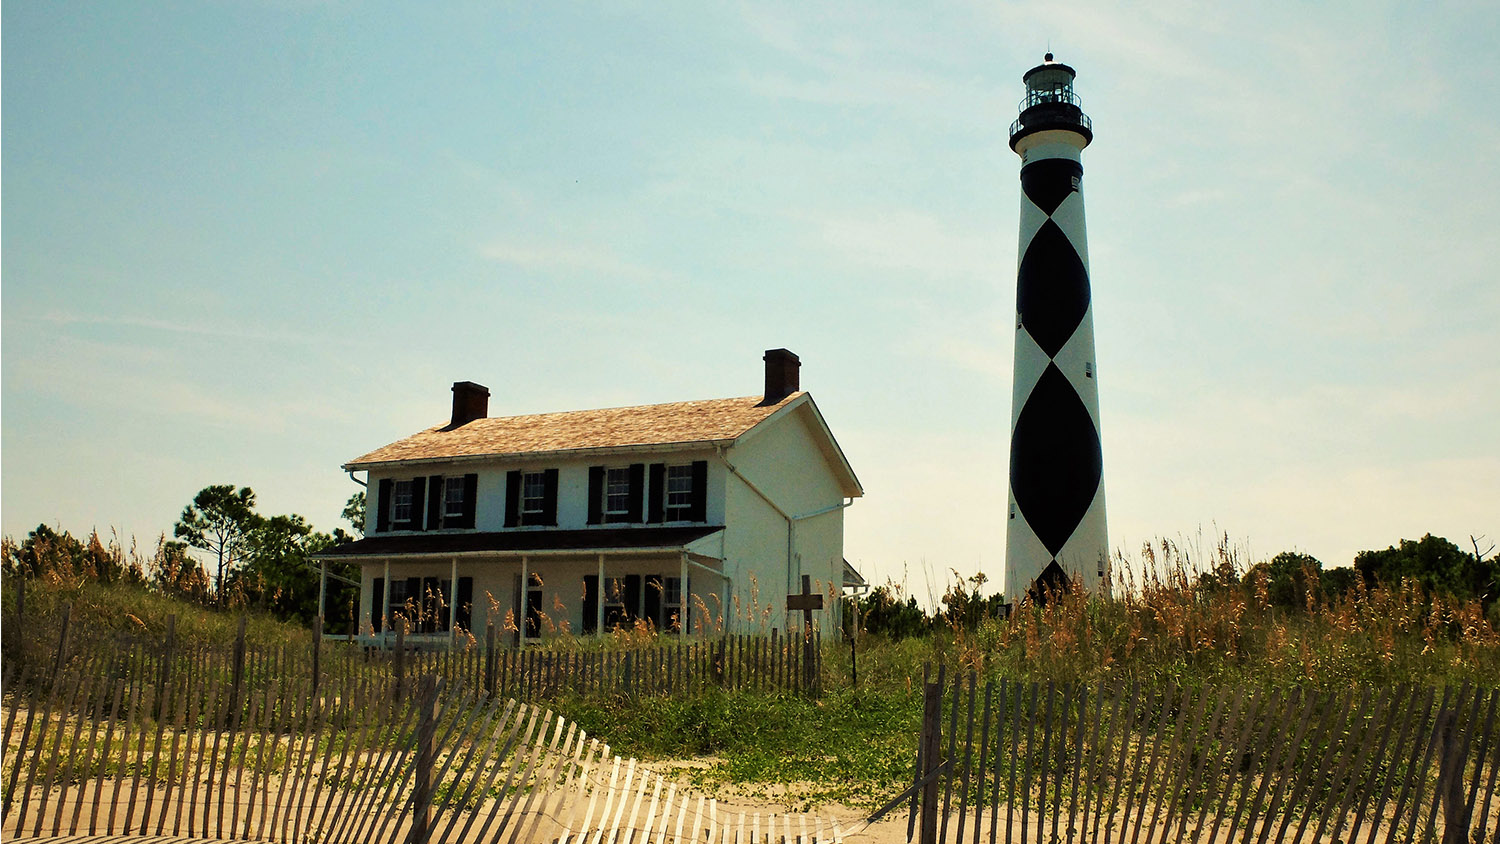 Lighthouse Next to a House - Extension and Outreach - Parks Recreation and Tourism Management NC State